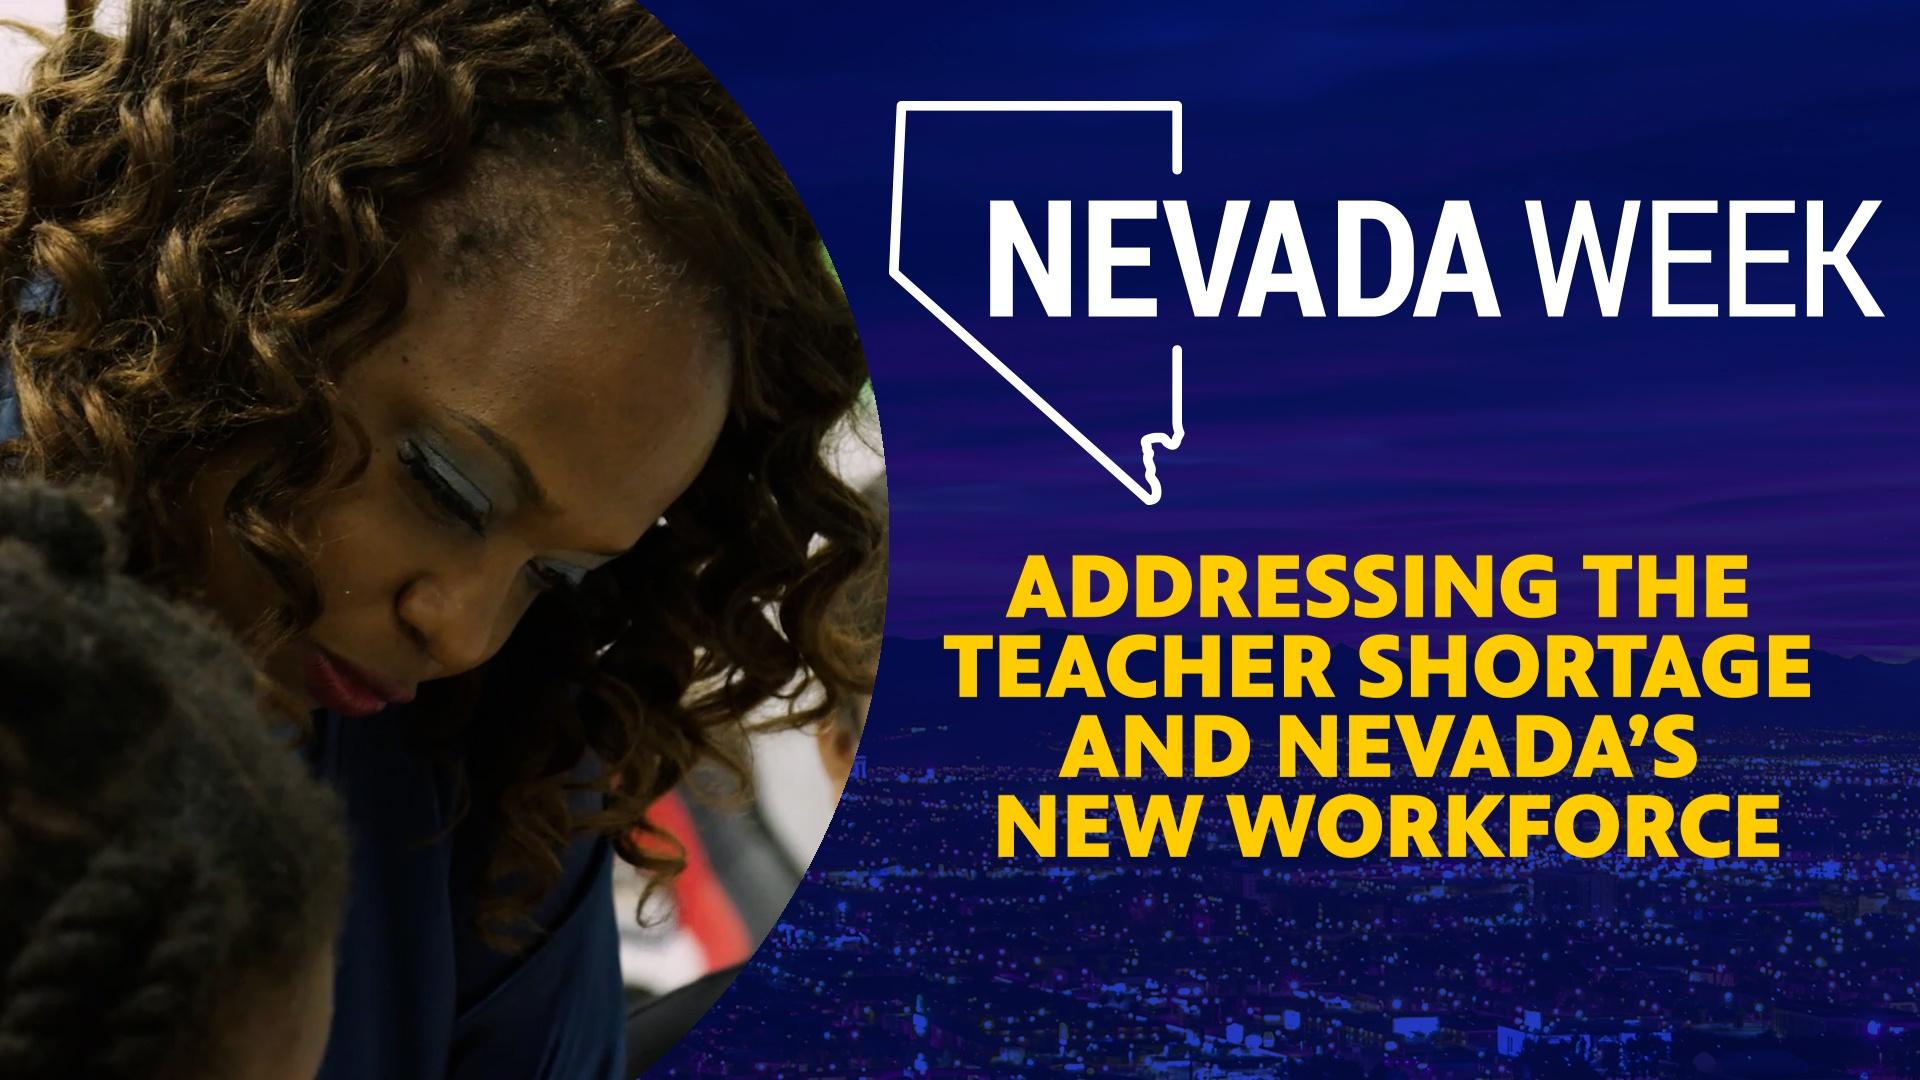 Addressing the Teacher Shortage and Nevada’s New Workforce